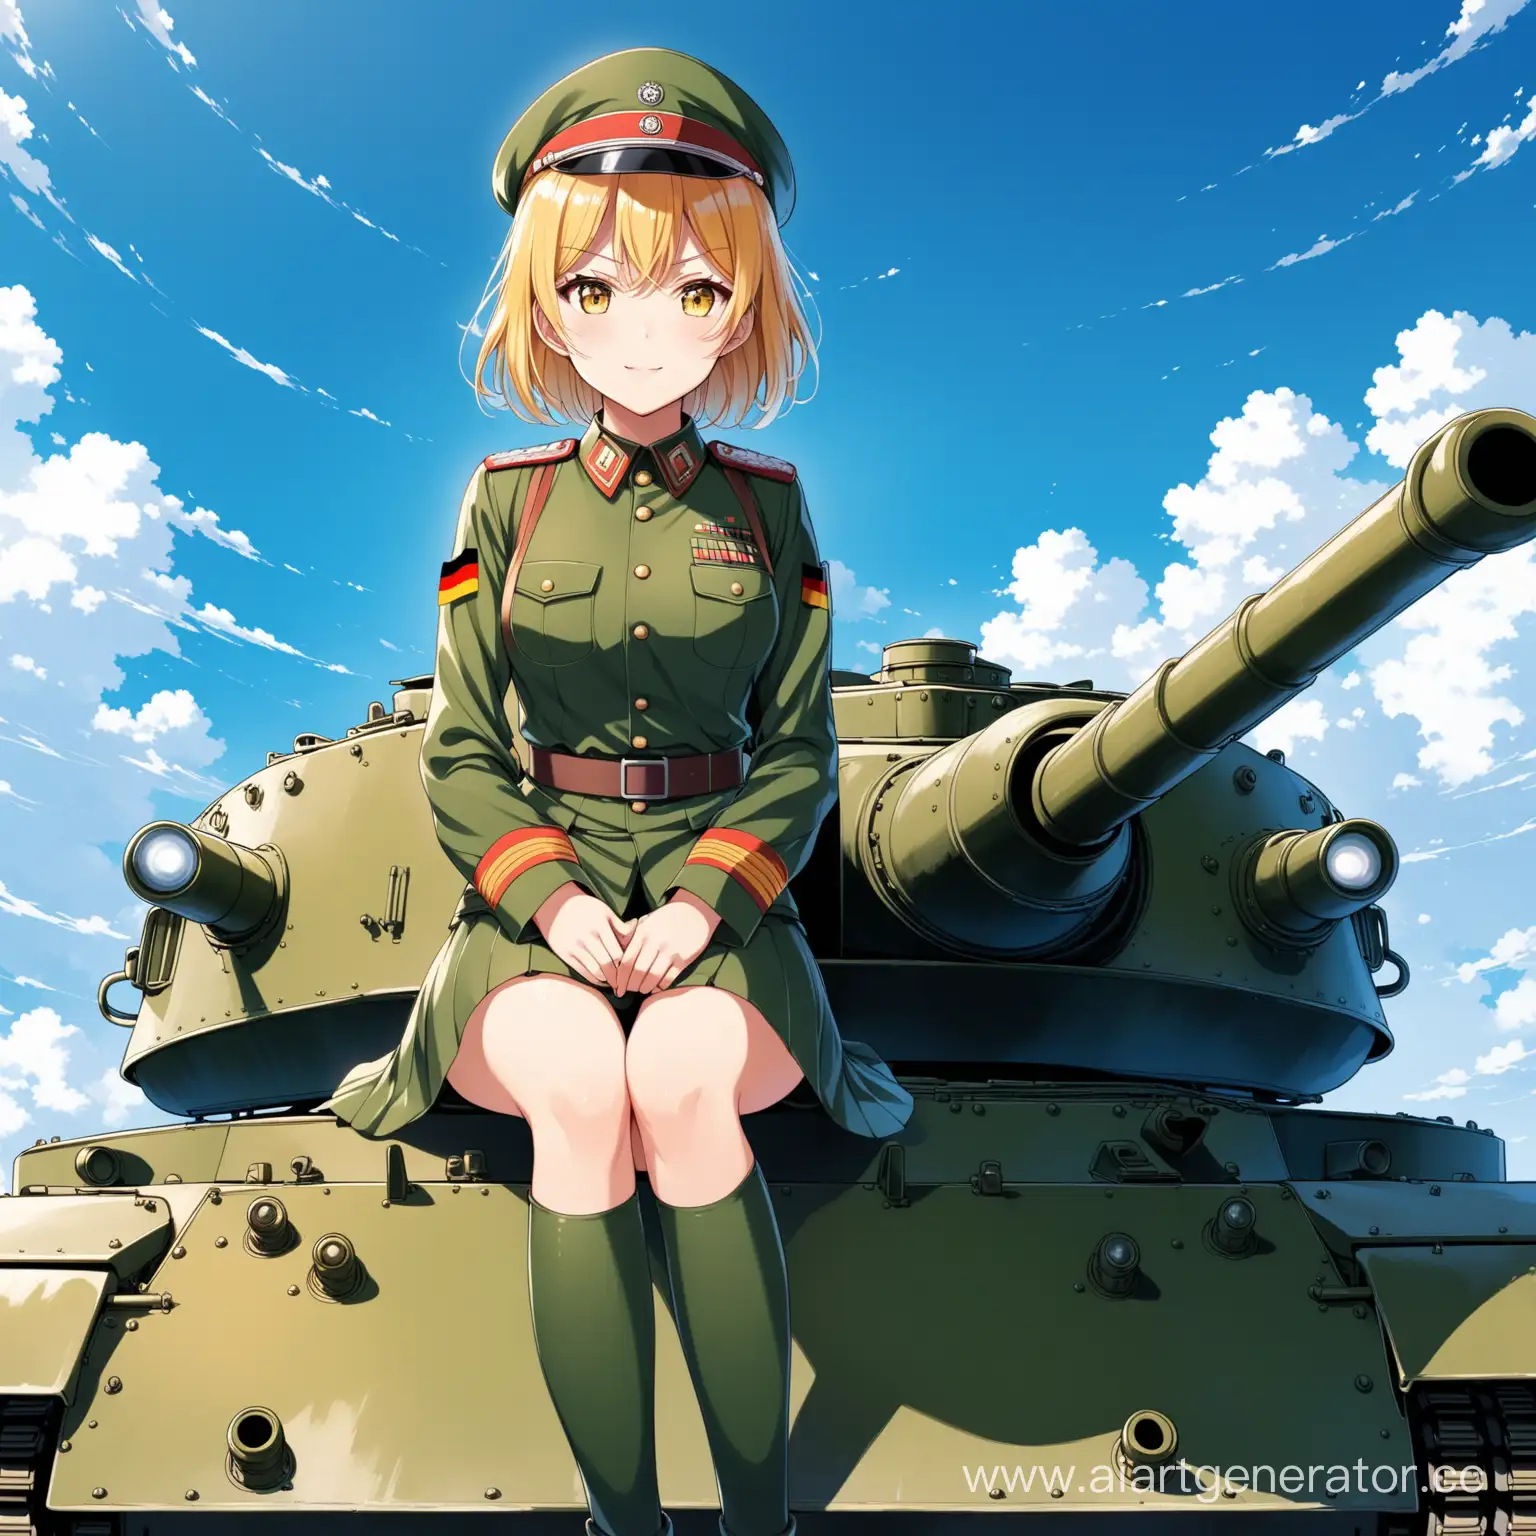 Anime girl in a German uniform sits on a Tiger tank